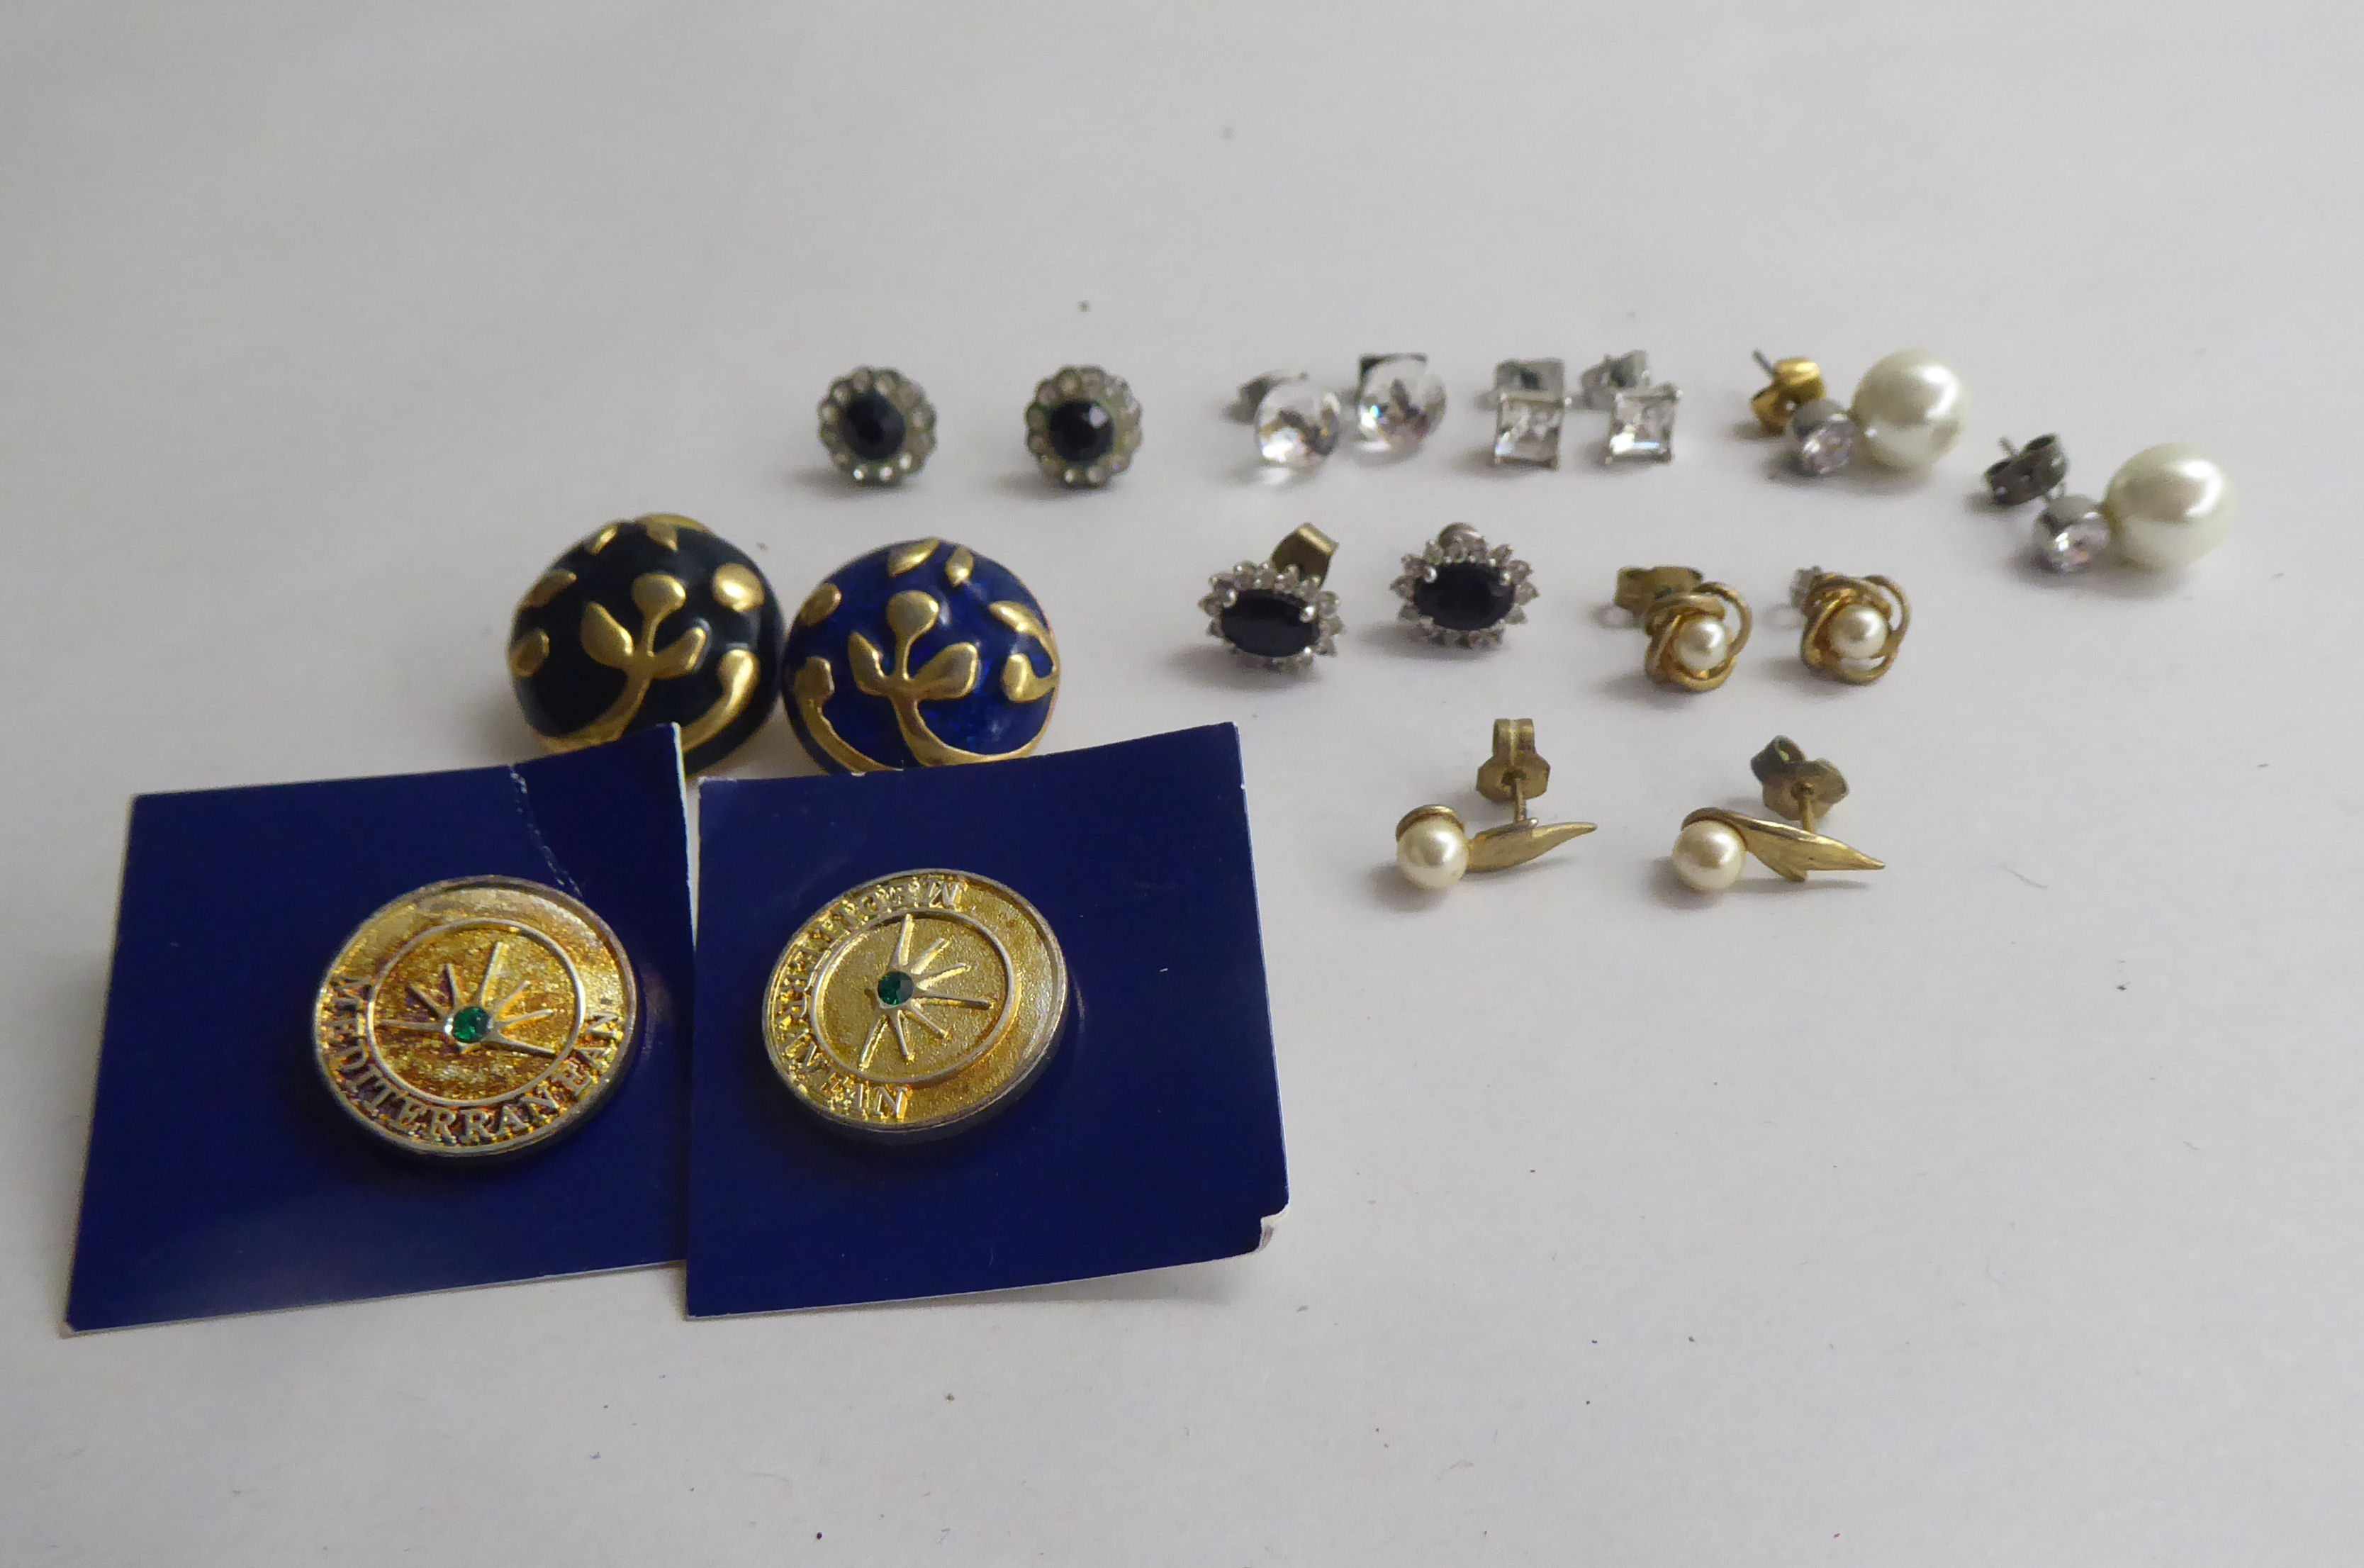 Costume jewellery and items of personal ornament: to include earrings and necklaces - Image 3 of 8